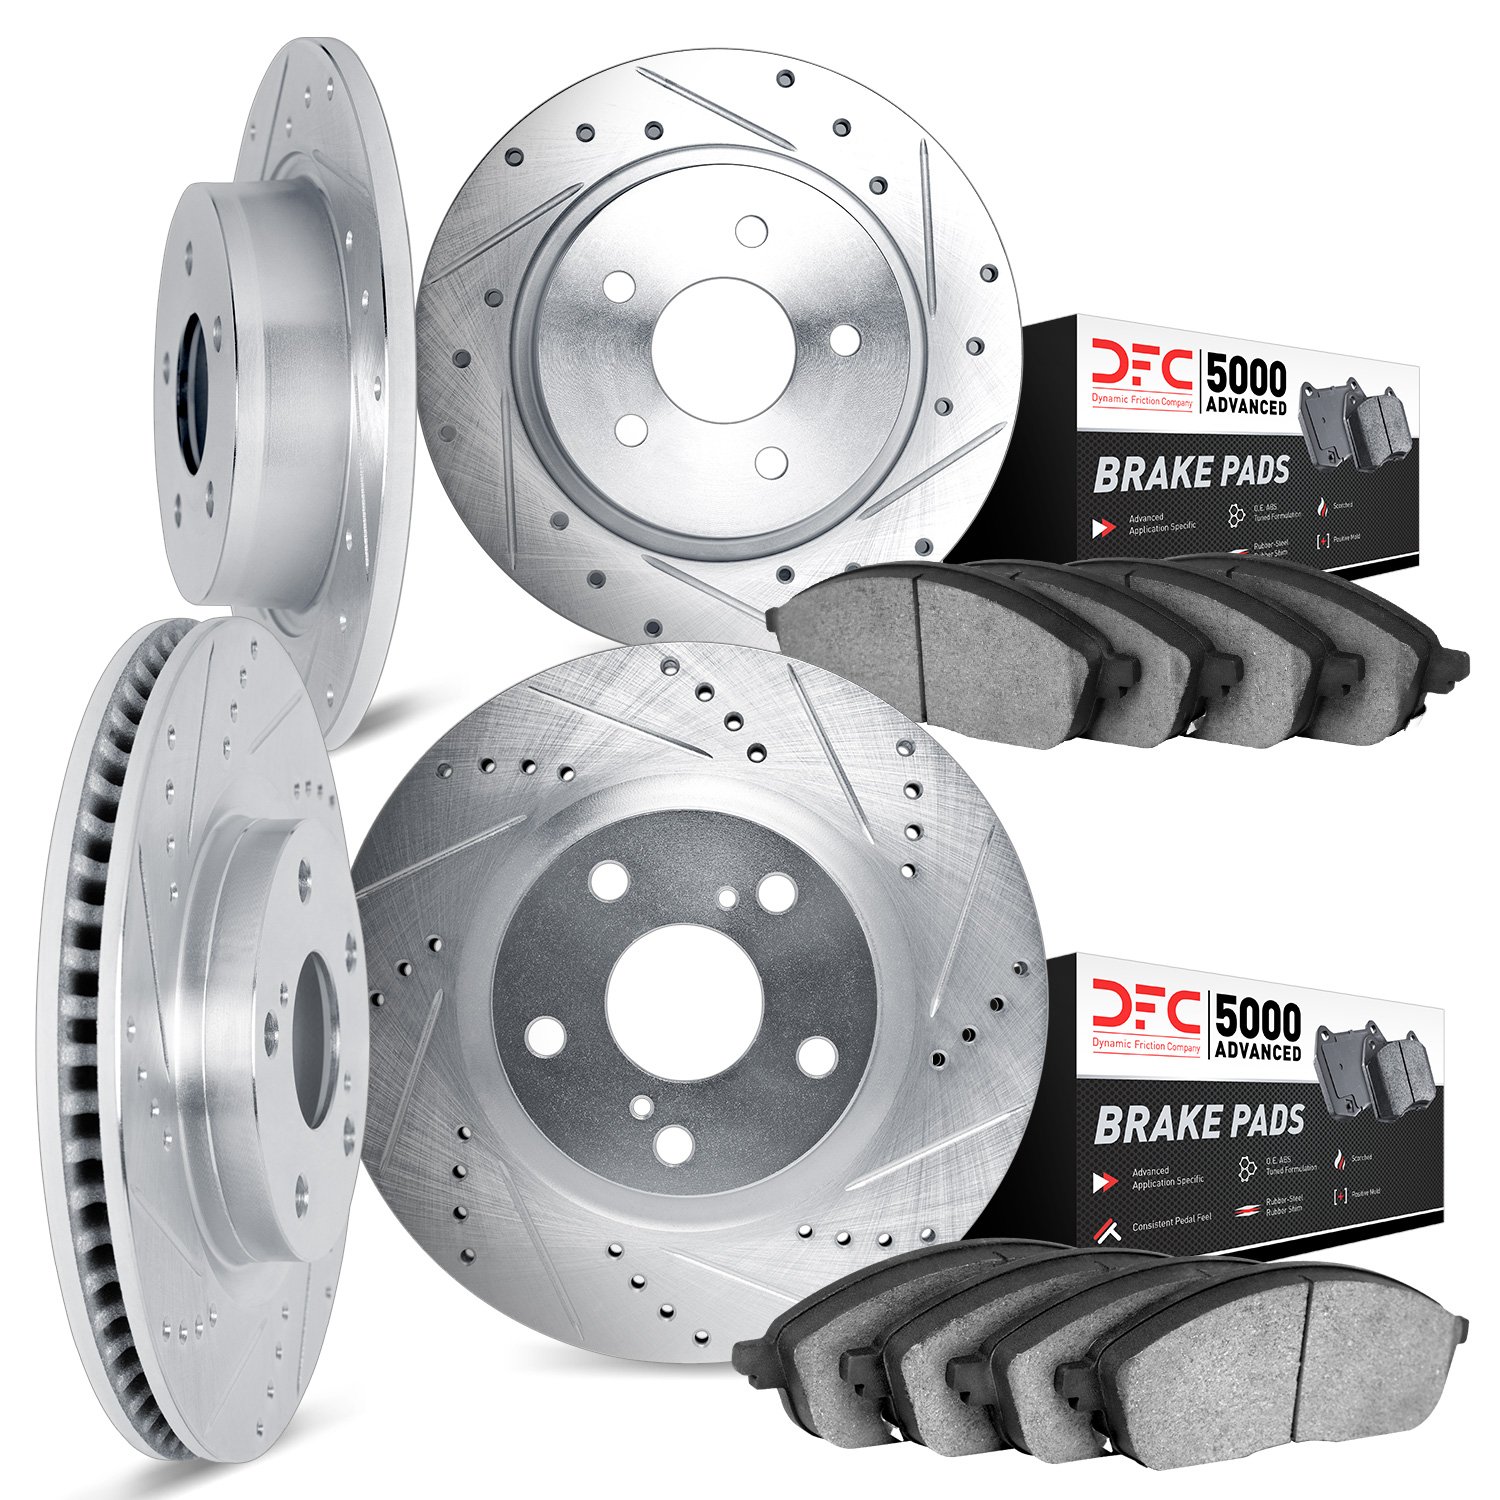 7504-76132 Drilled/Slotted Brake Rotors w/5000 Advanced Brake Pads Kit [Silver], 2000-2003 Lexus/Toyota/Scion, Position: Front a